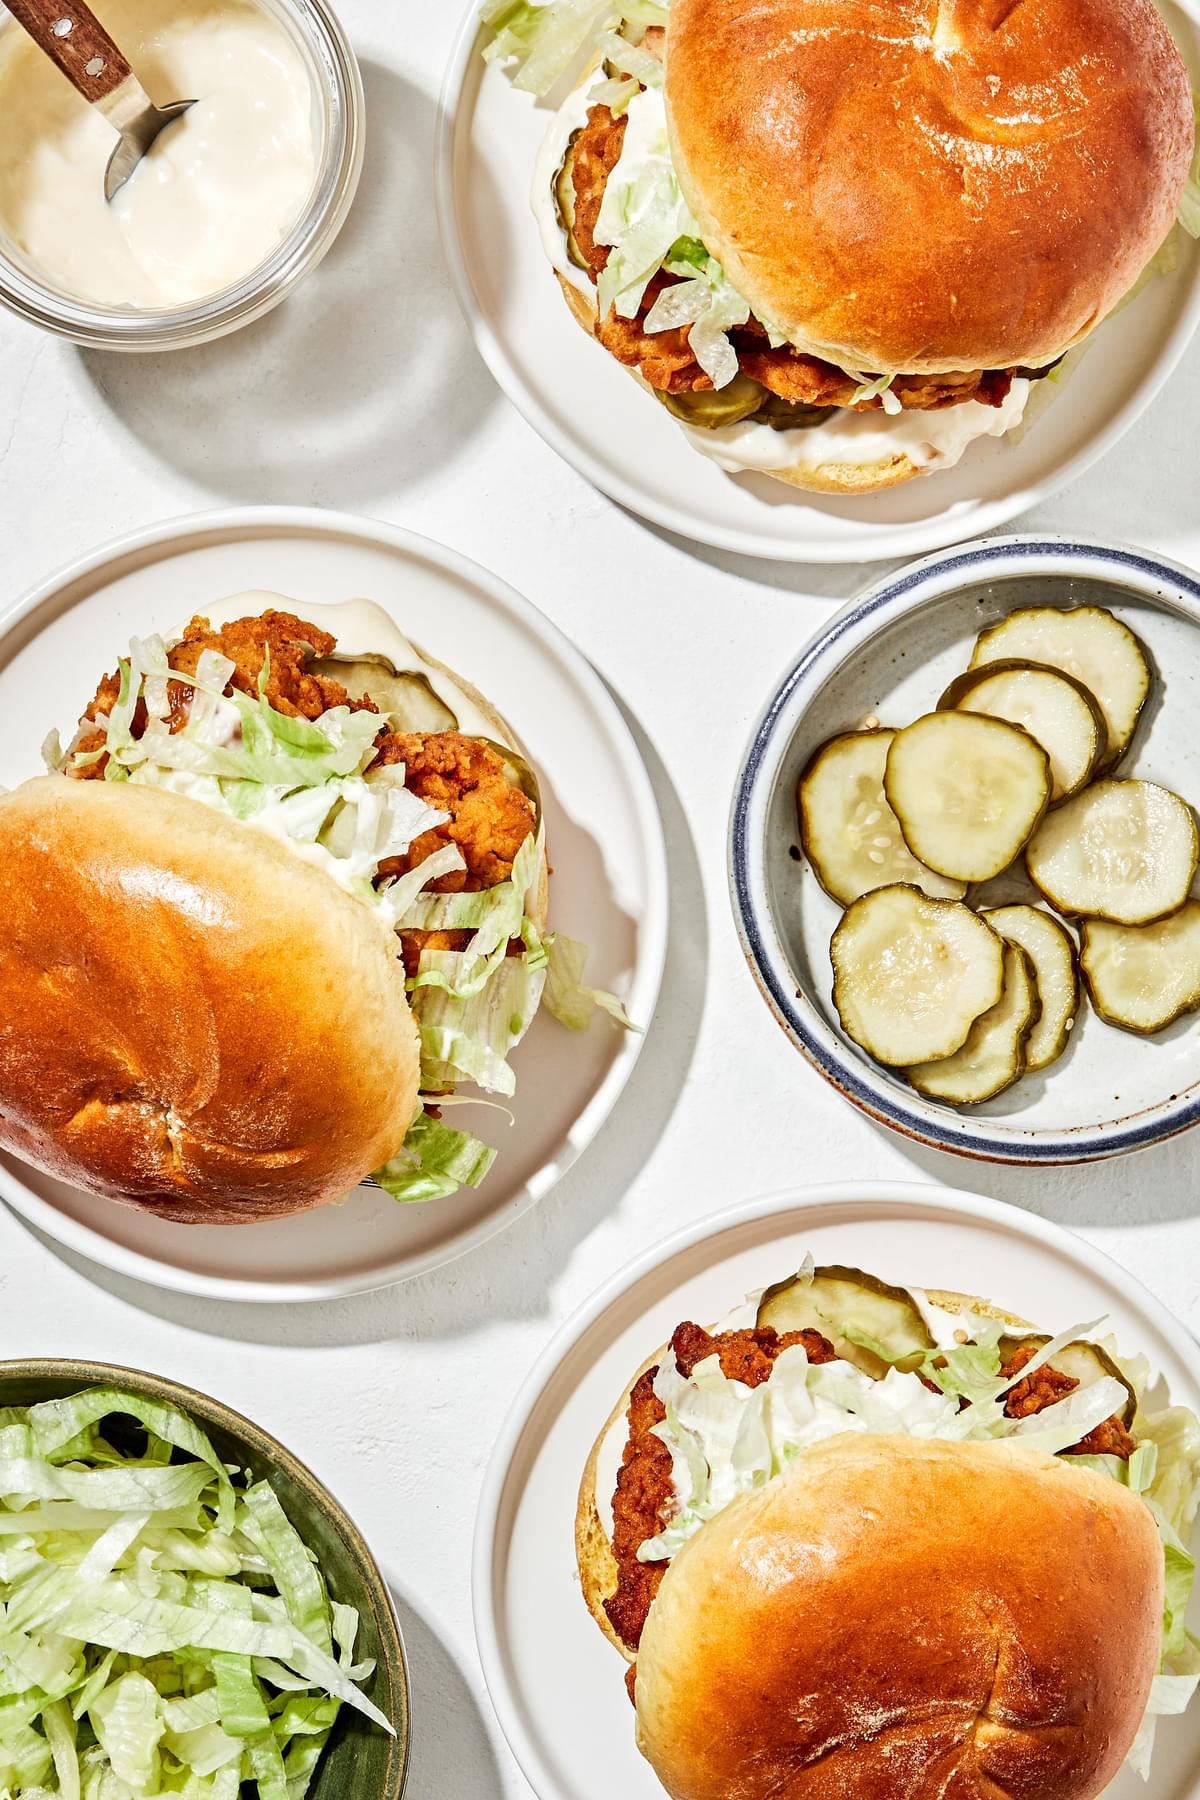 a homemade fried chicken sandwiches on a brioche buns with garlic aioli, sliced pickles and shredded iceberg lettuce